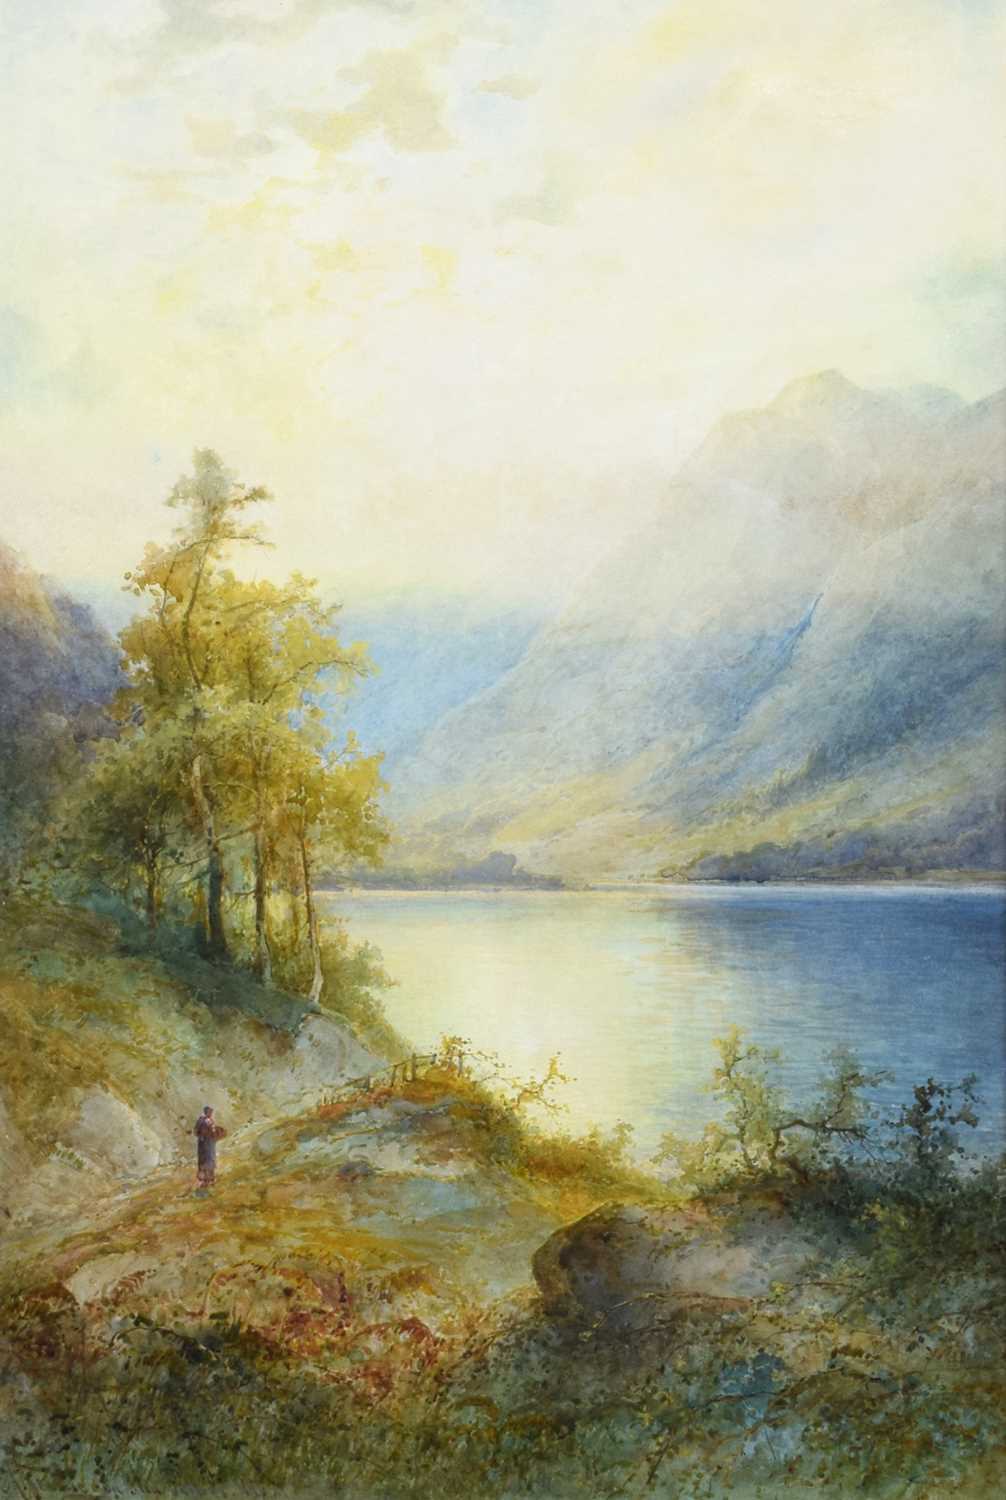 Emil Axel Krause (fl.1891-1914) "On Glen Falloch" and "On Loch Hourn" - Image 3 of 5